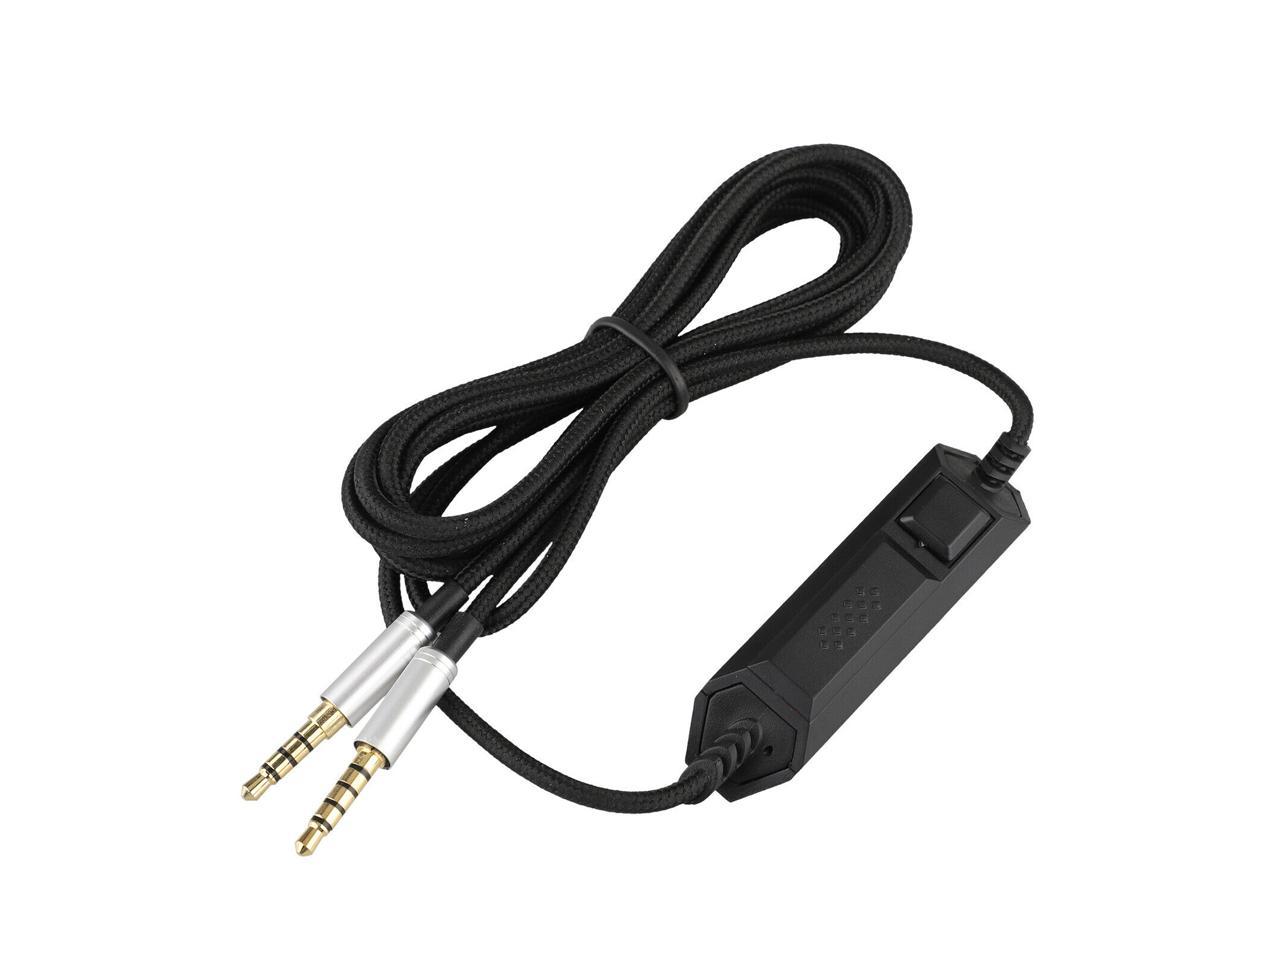 Audio Cable Gaming Headset Replacement Cord For Astro A10 0 A30 A50 3 5mm 2m Newegg Com